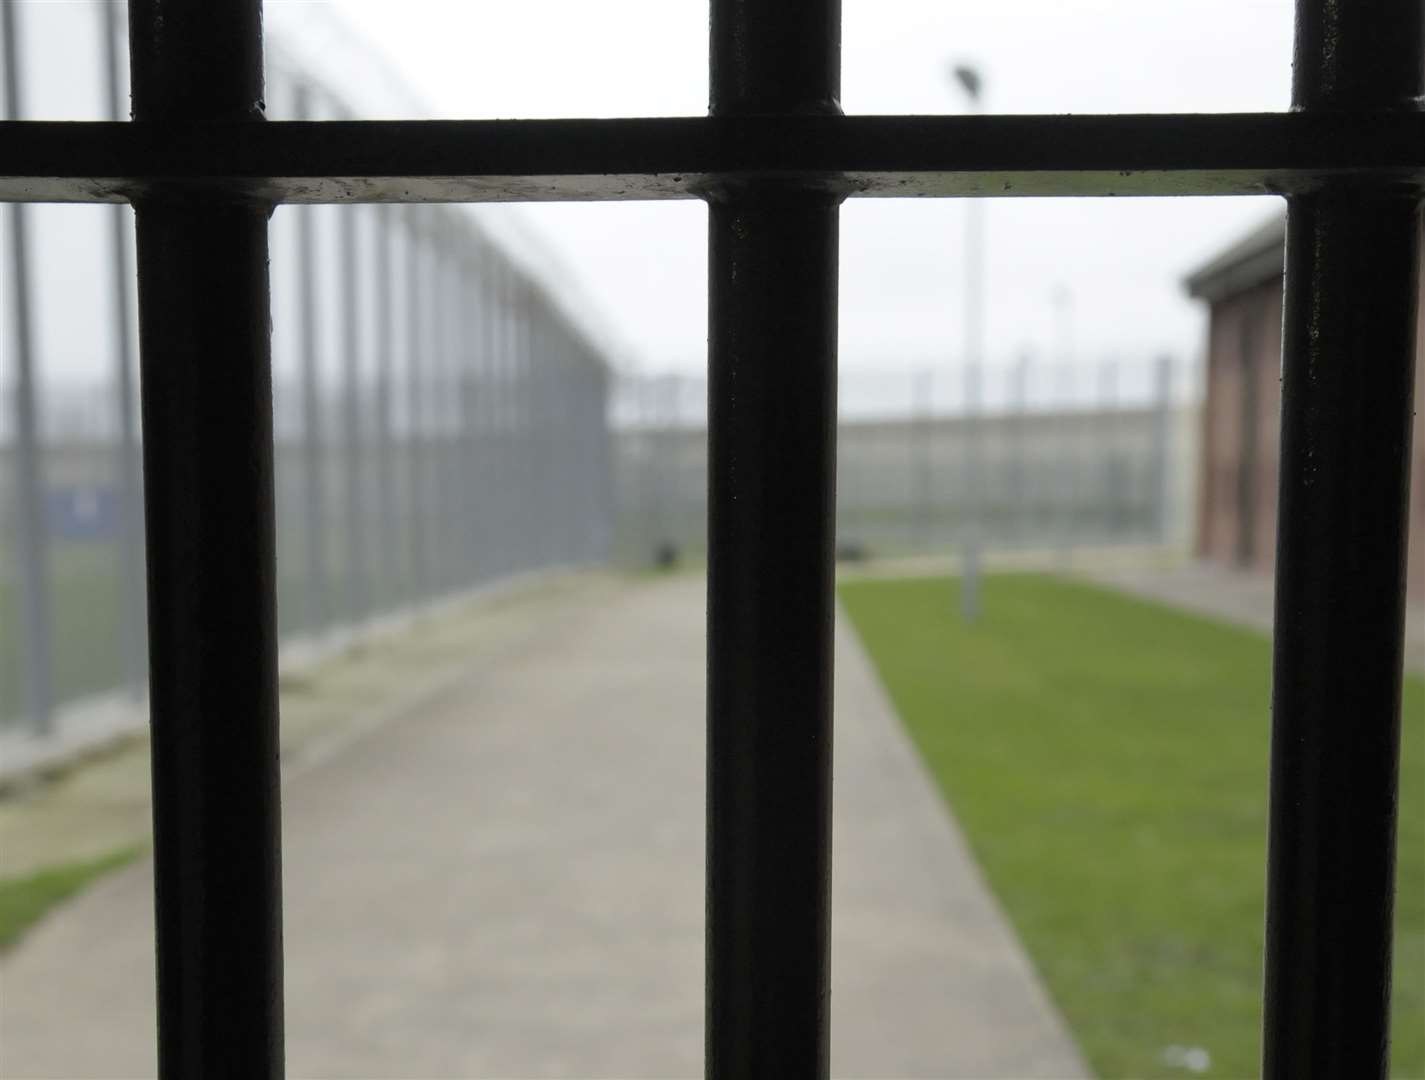 More prisoners are making hooch within their cells. Picture: Andy Payton